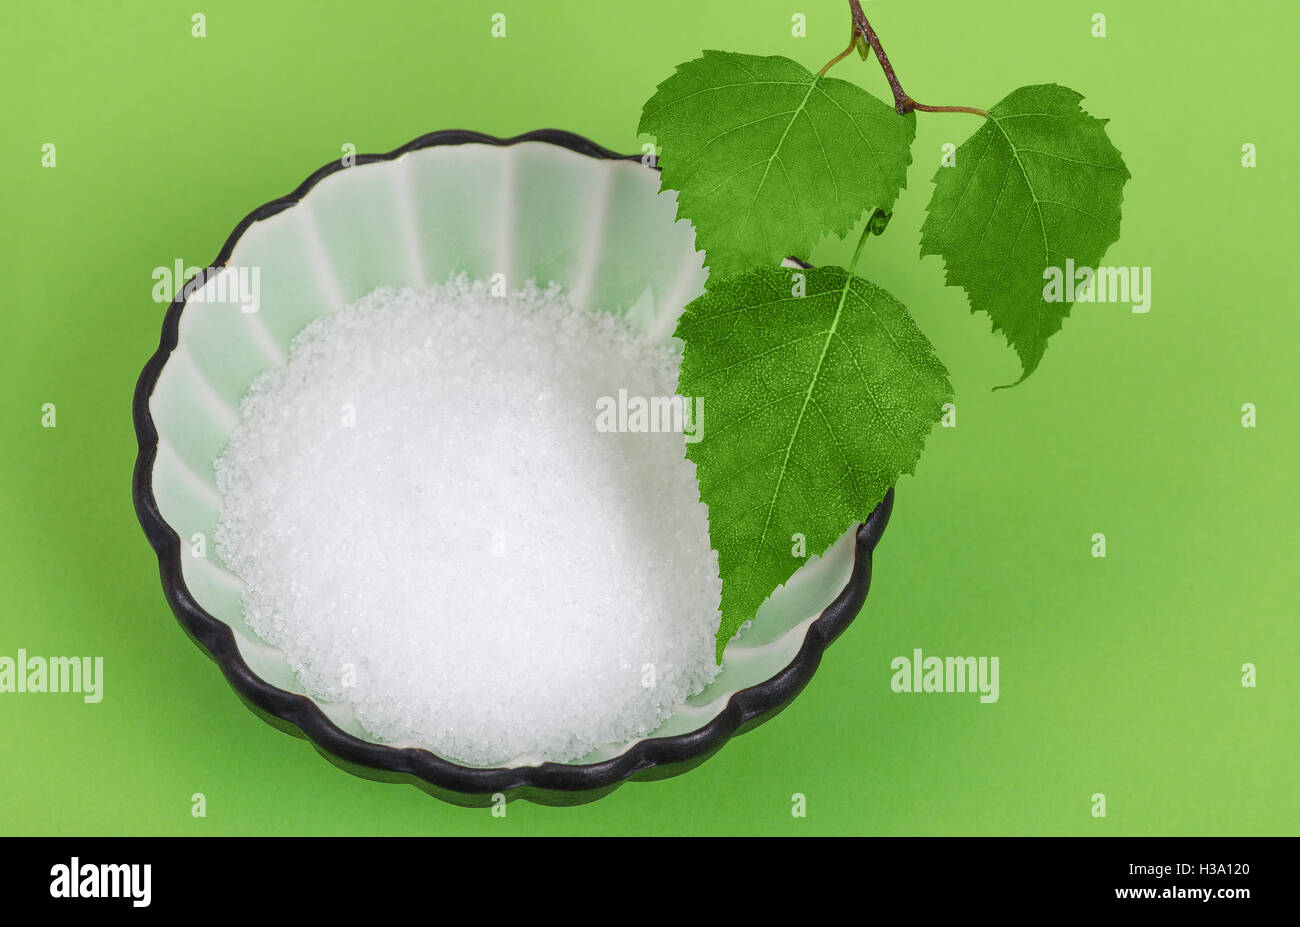 Xylitol birch sugar in white porcelain bowl with birch leaves over green. White granulated sugar alcohol, substitute sweetener. Stock Photo